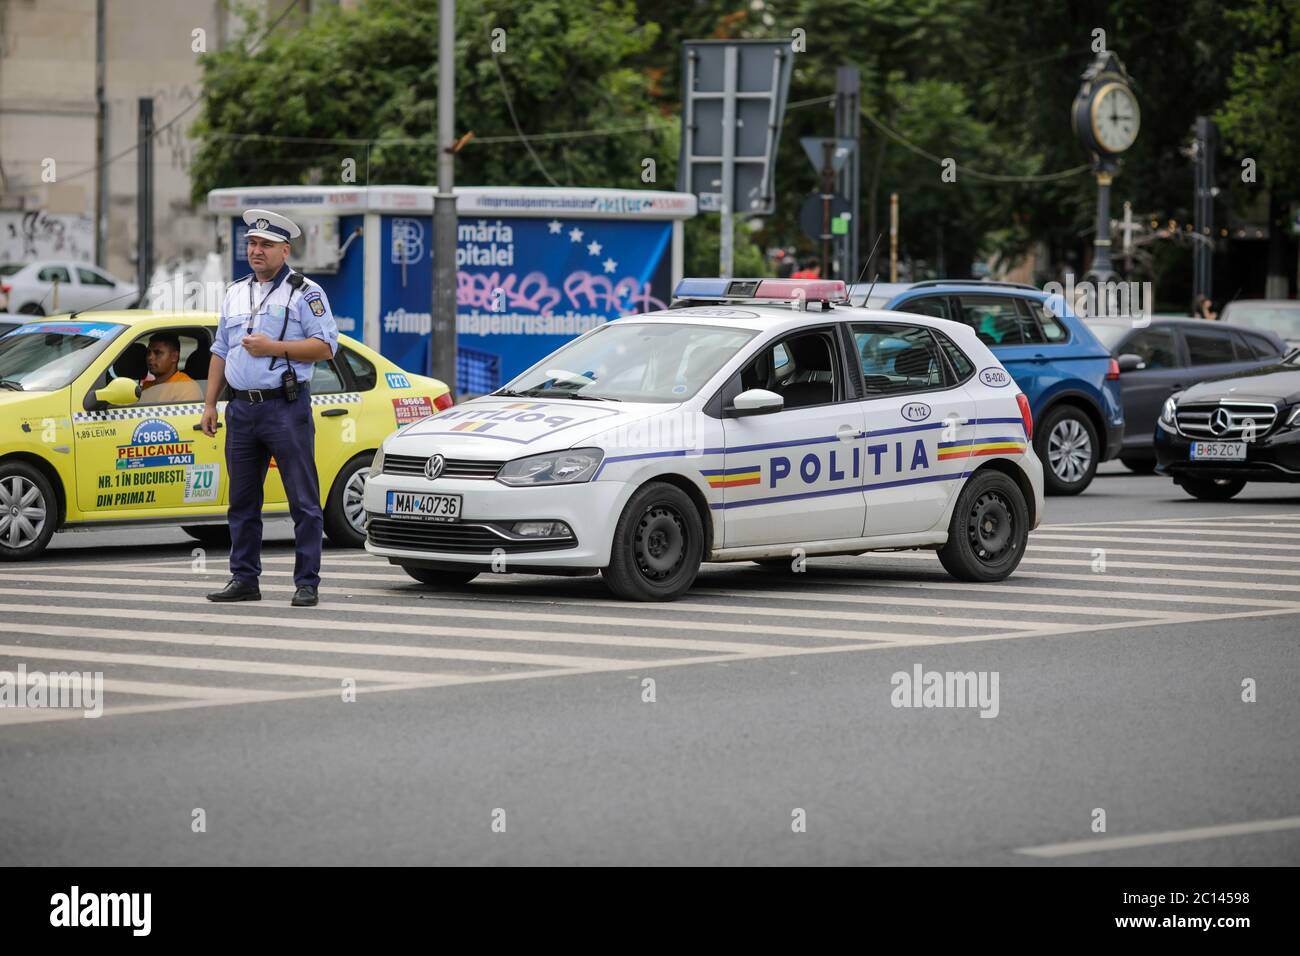 Bucharest, Romania - June 13, 2020: Romanian police officer near a police car in downtown Bucharest. Stock Photo